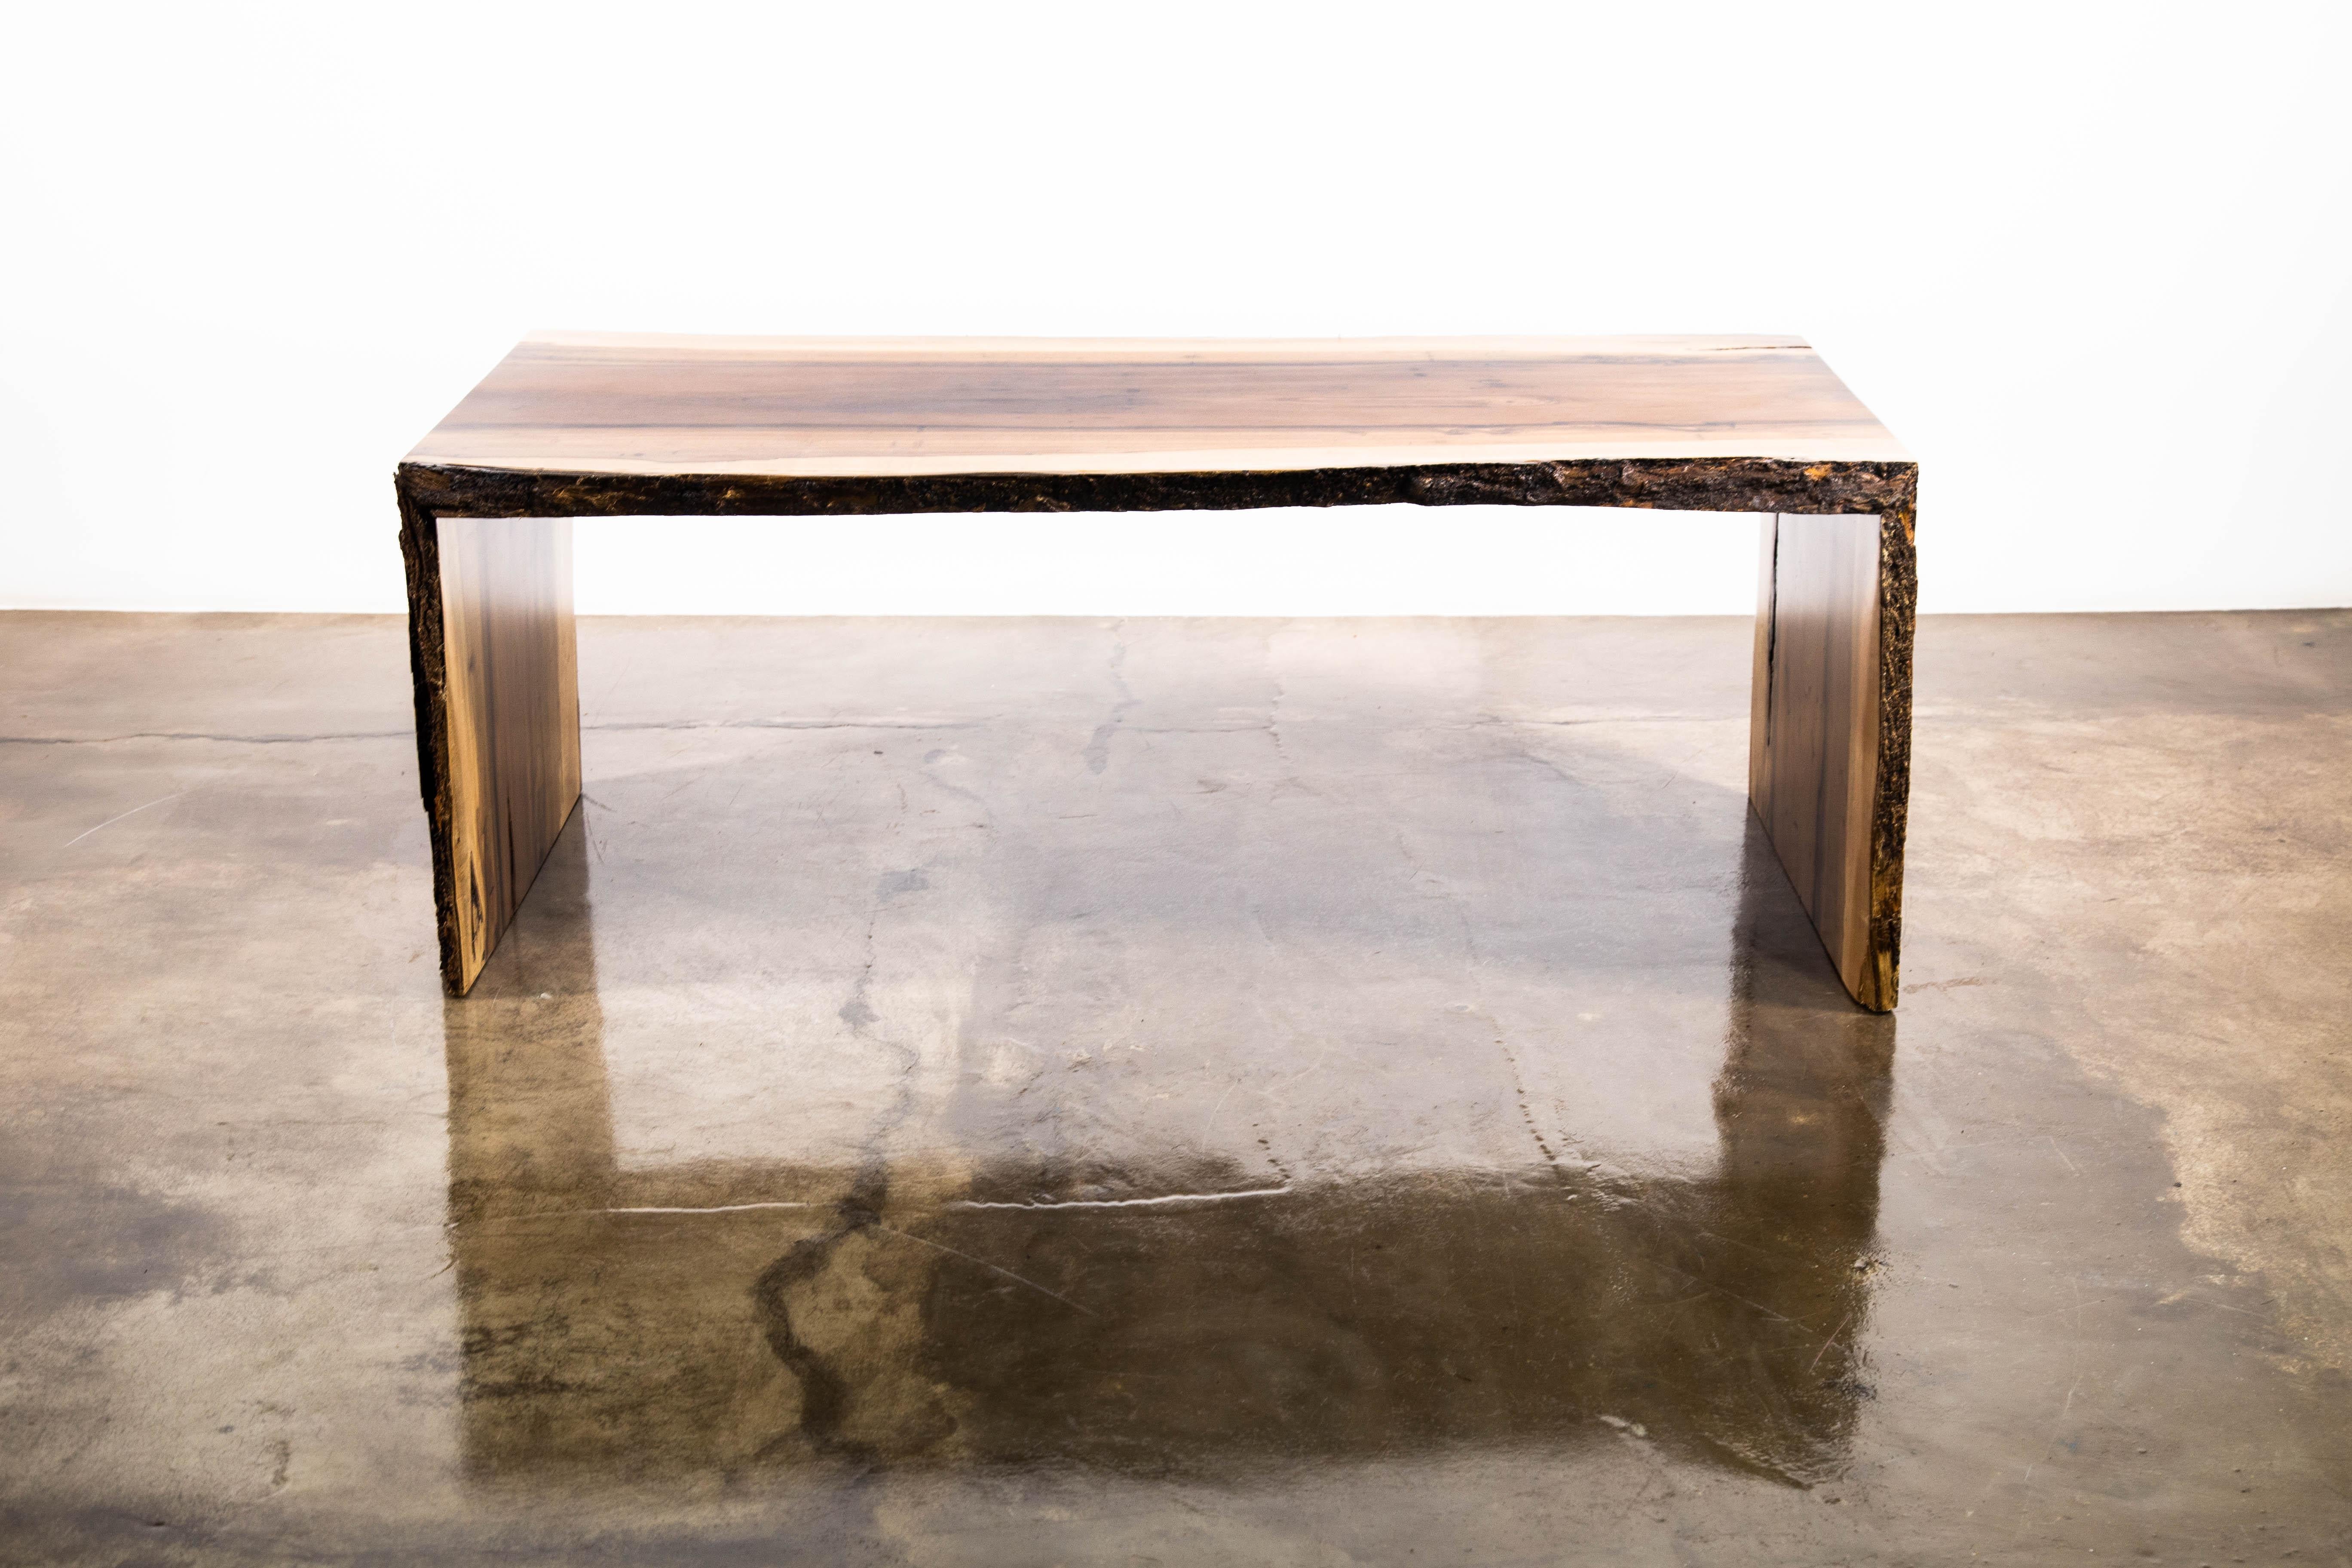 The Carlo Table is a waterfall style live edge table fashioned out of naturally finished solid Argentine Rosewood. Its minimal design lets nature's beauty take center stage. Available as shown for immediate delivery or custom order in the size,